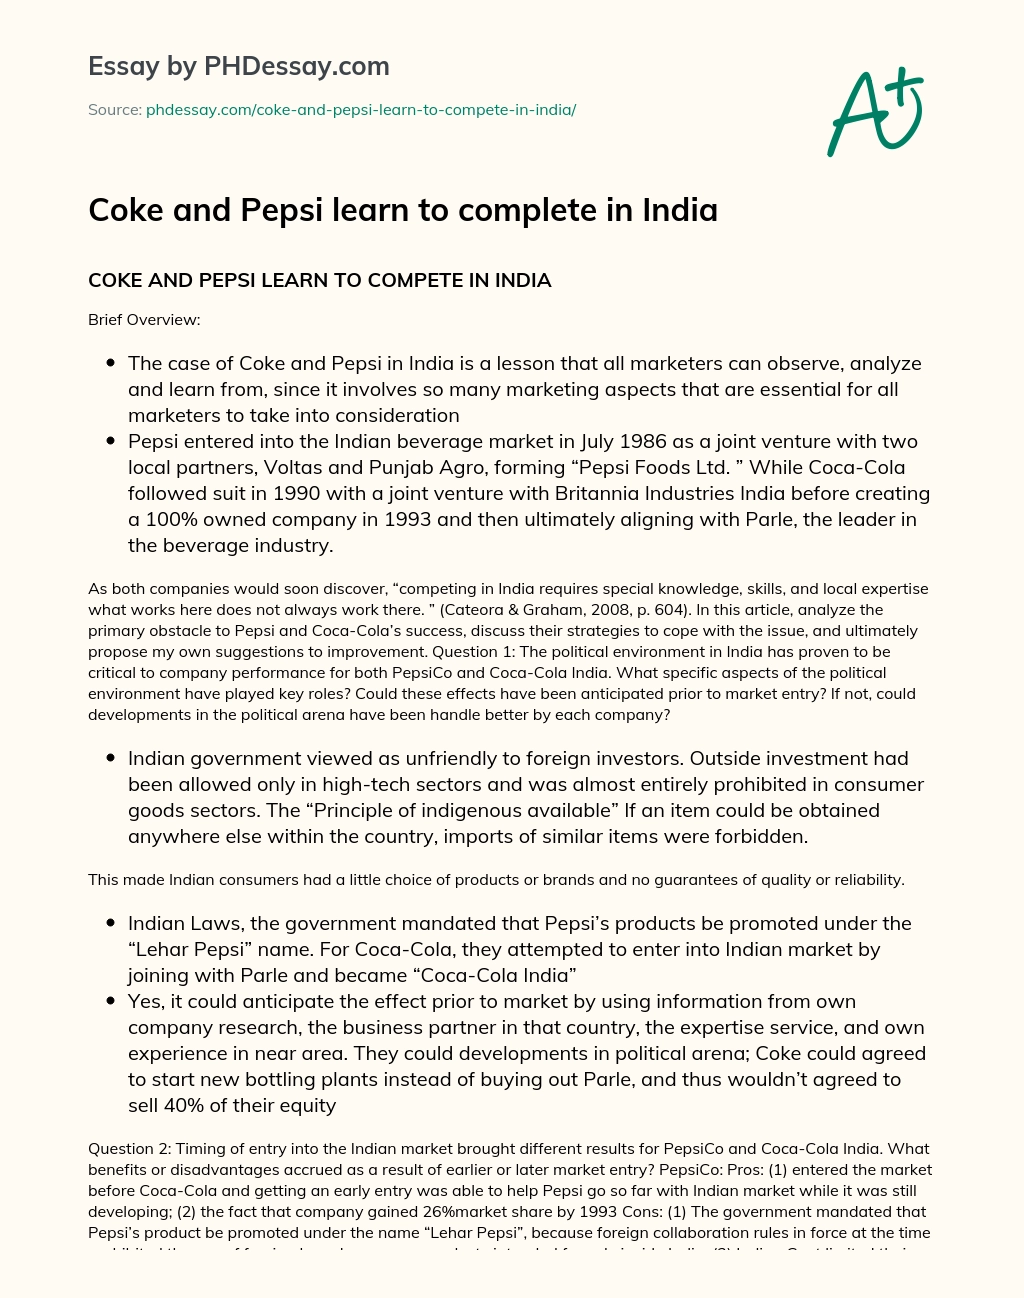 Coke and Pepsi learn to complete in India essay